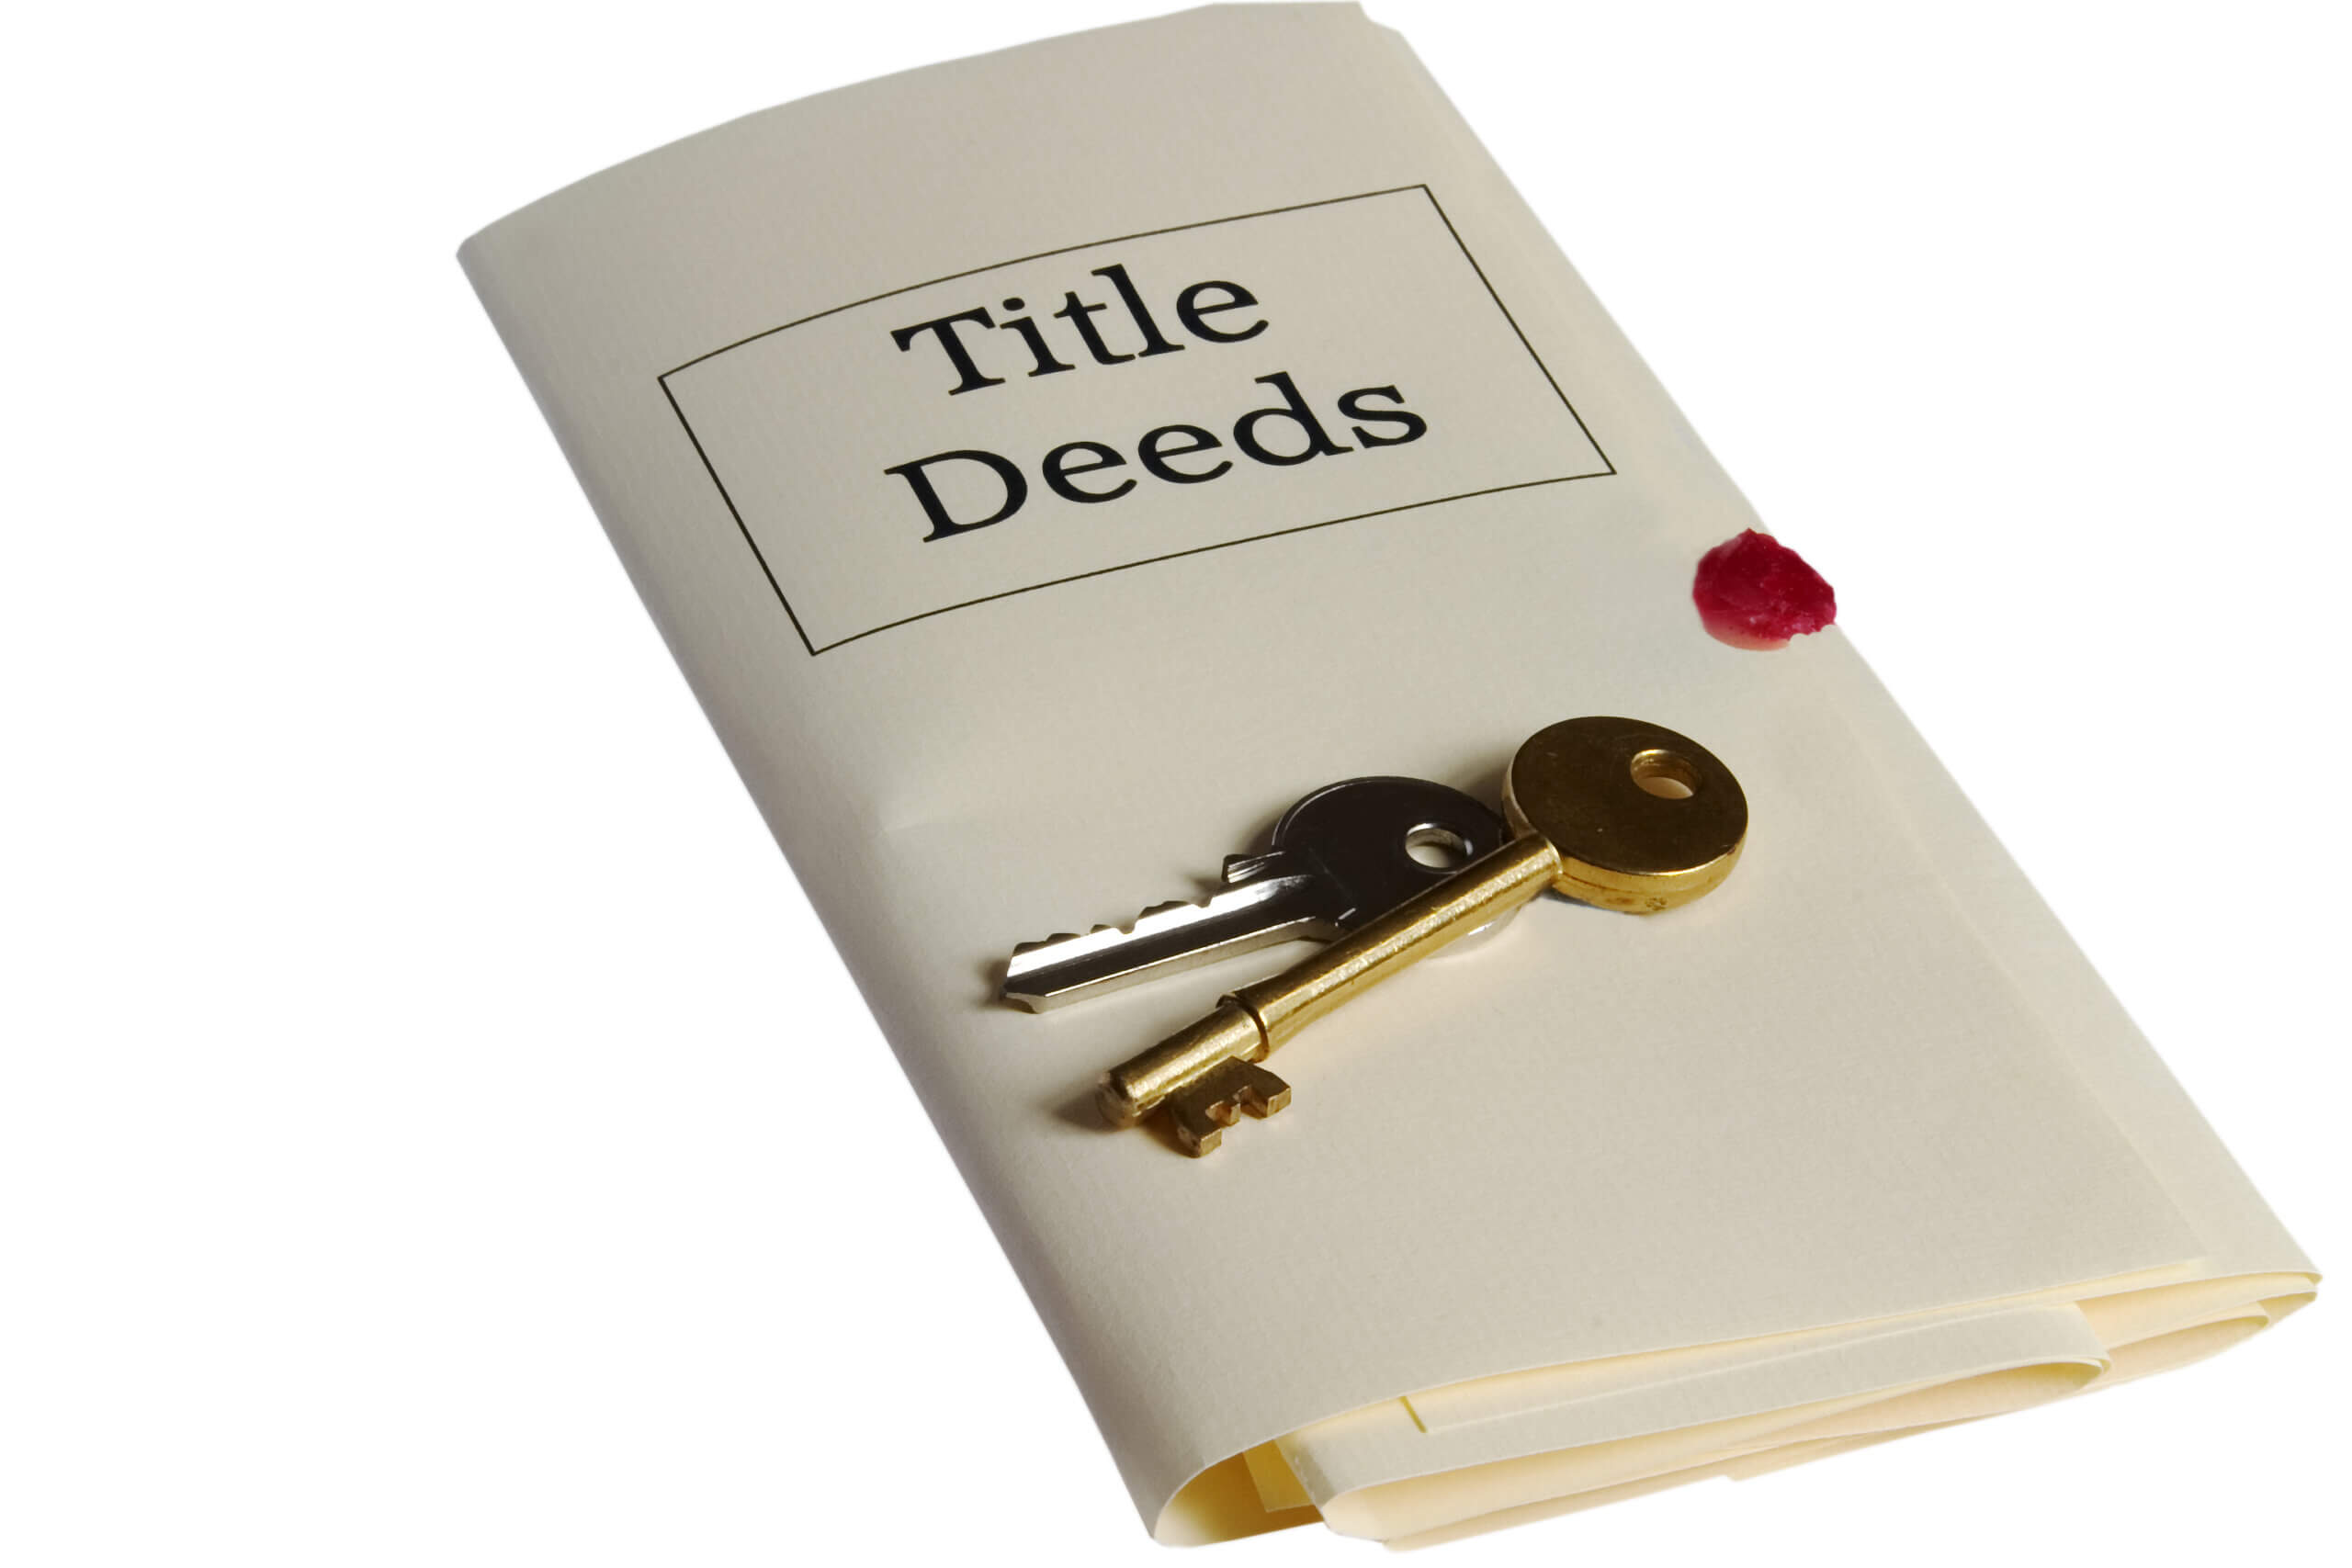 How do I transfer the title or deed of a house